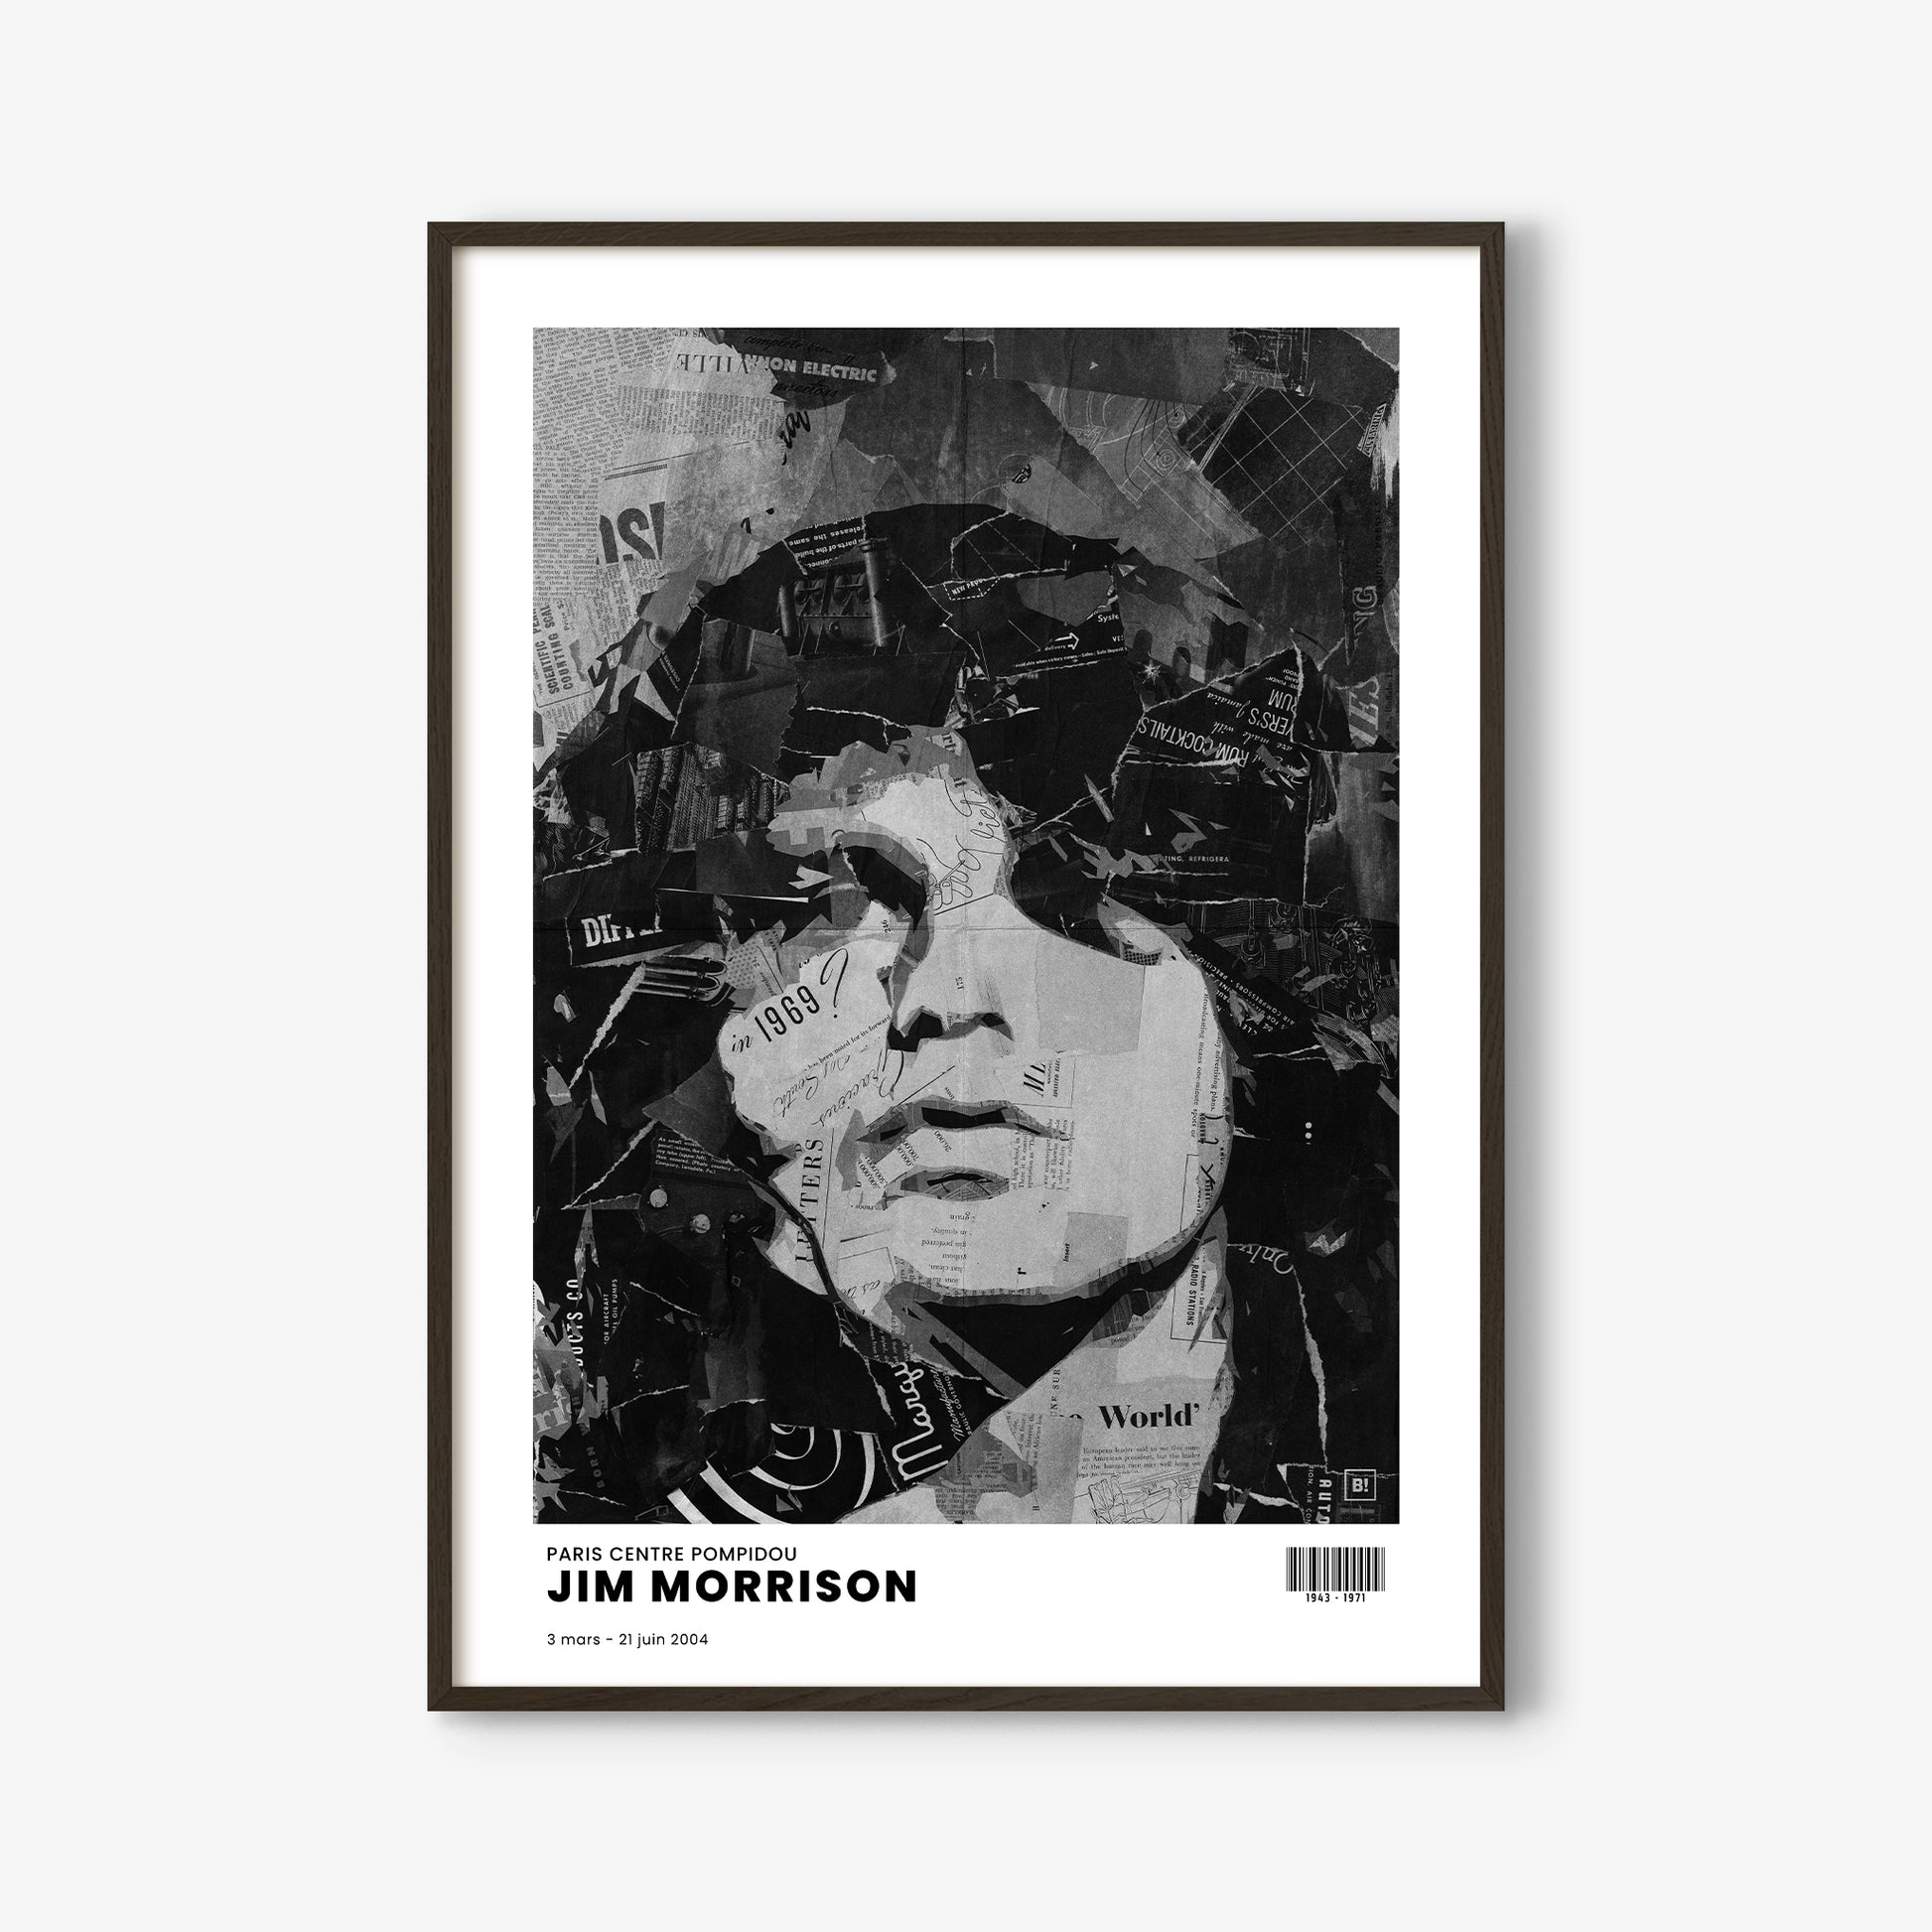 Be inspired by Iconic Jim Morrison Paris Centre Pompidou Exhibition Art Print. The artwork is presented in a black oak frame that captures its timeless beauty in every detail.